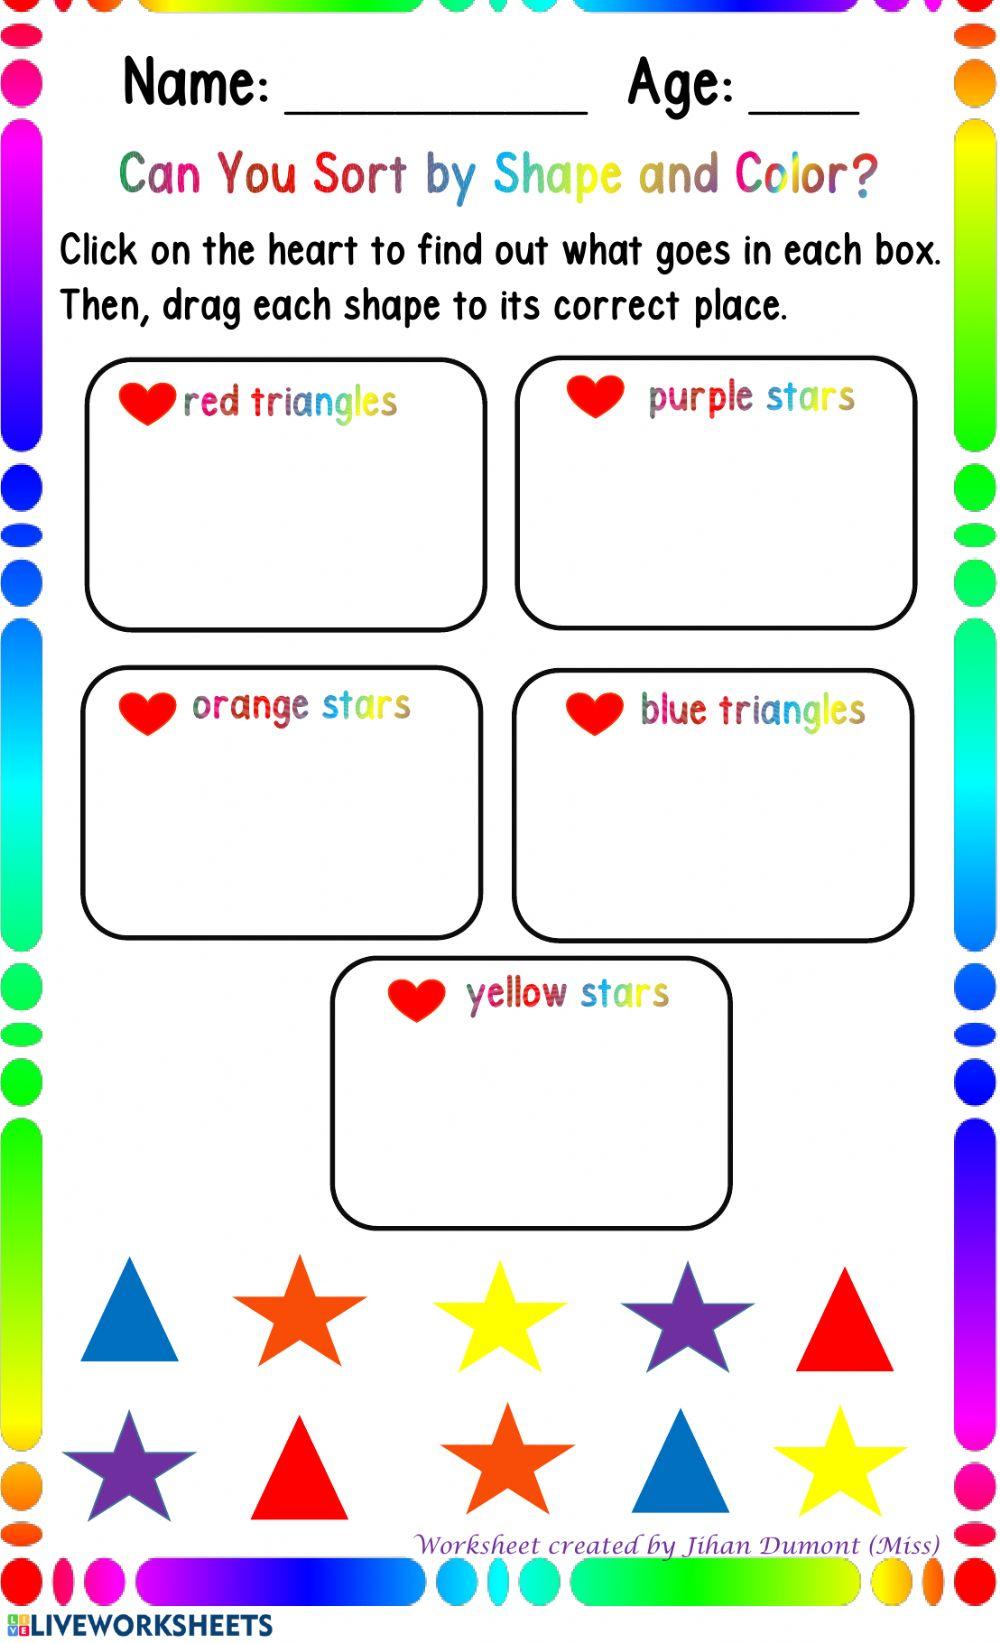 Sorting by Color and Shape